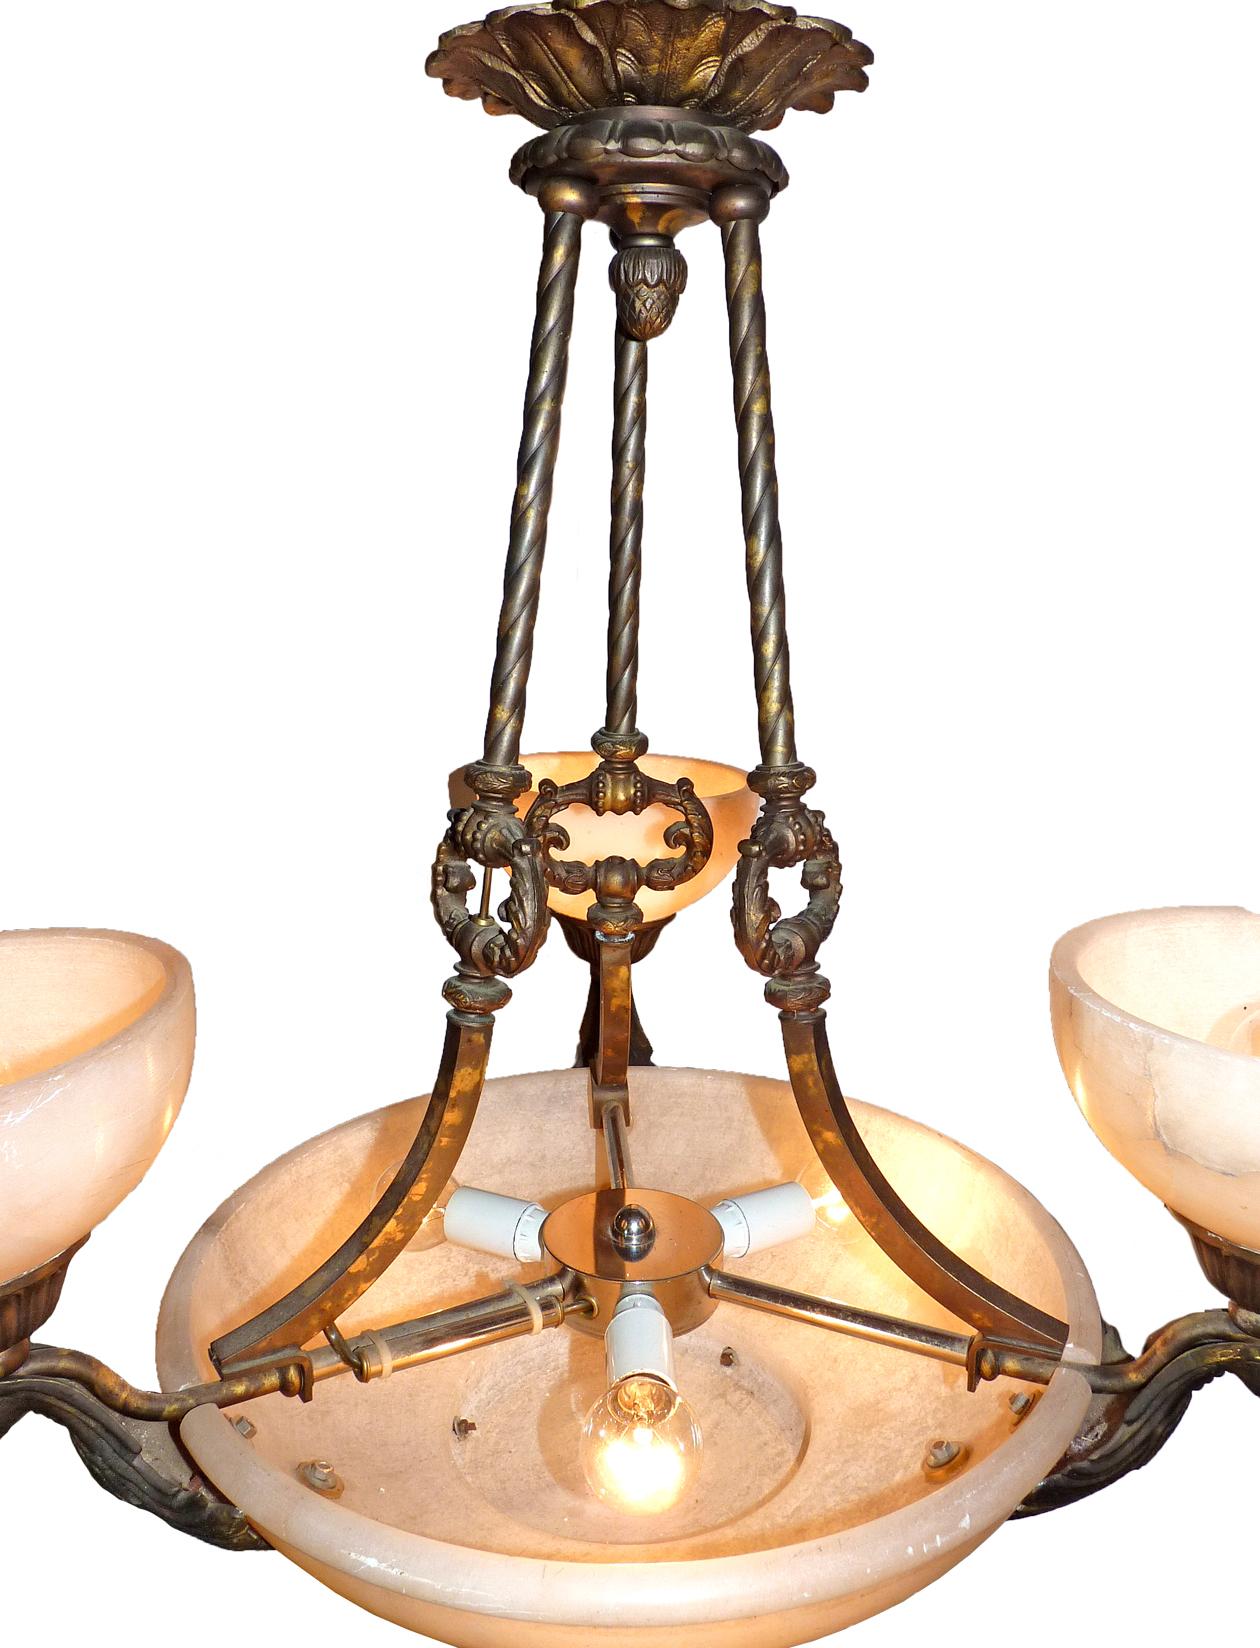 20th Century Midcentury French Art Deco and Neoclassical White Marble, Gilt Chandelier For Sale